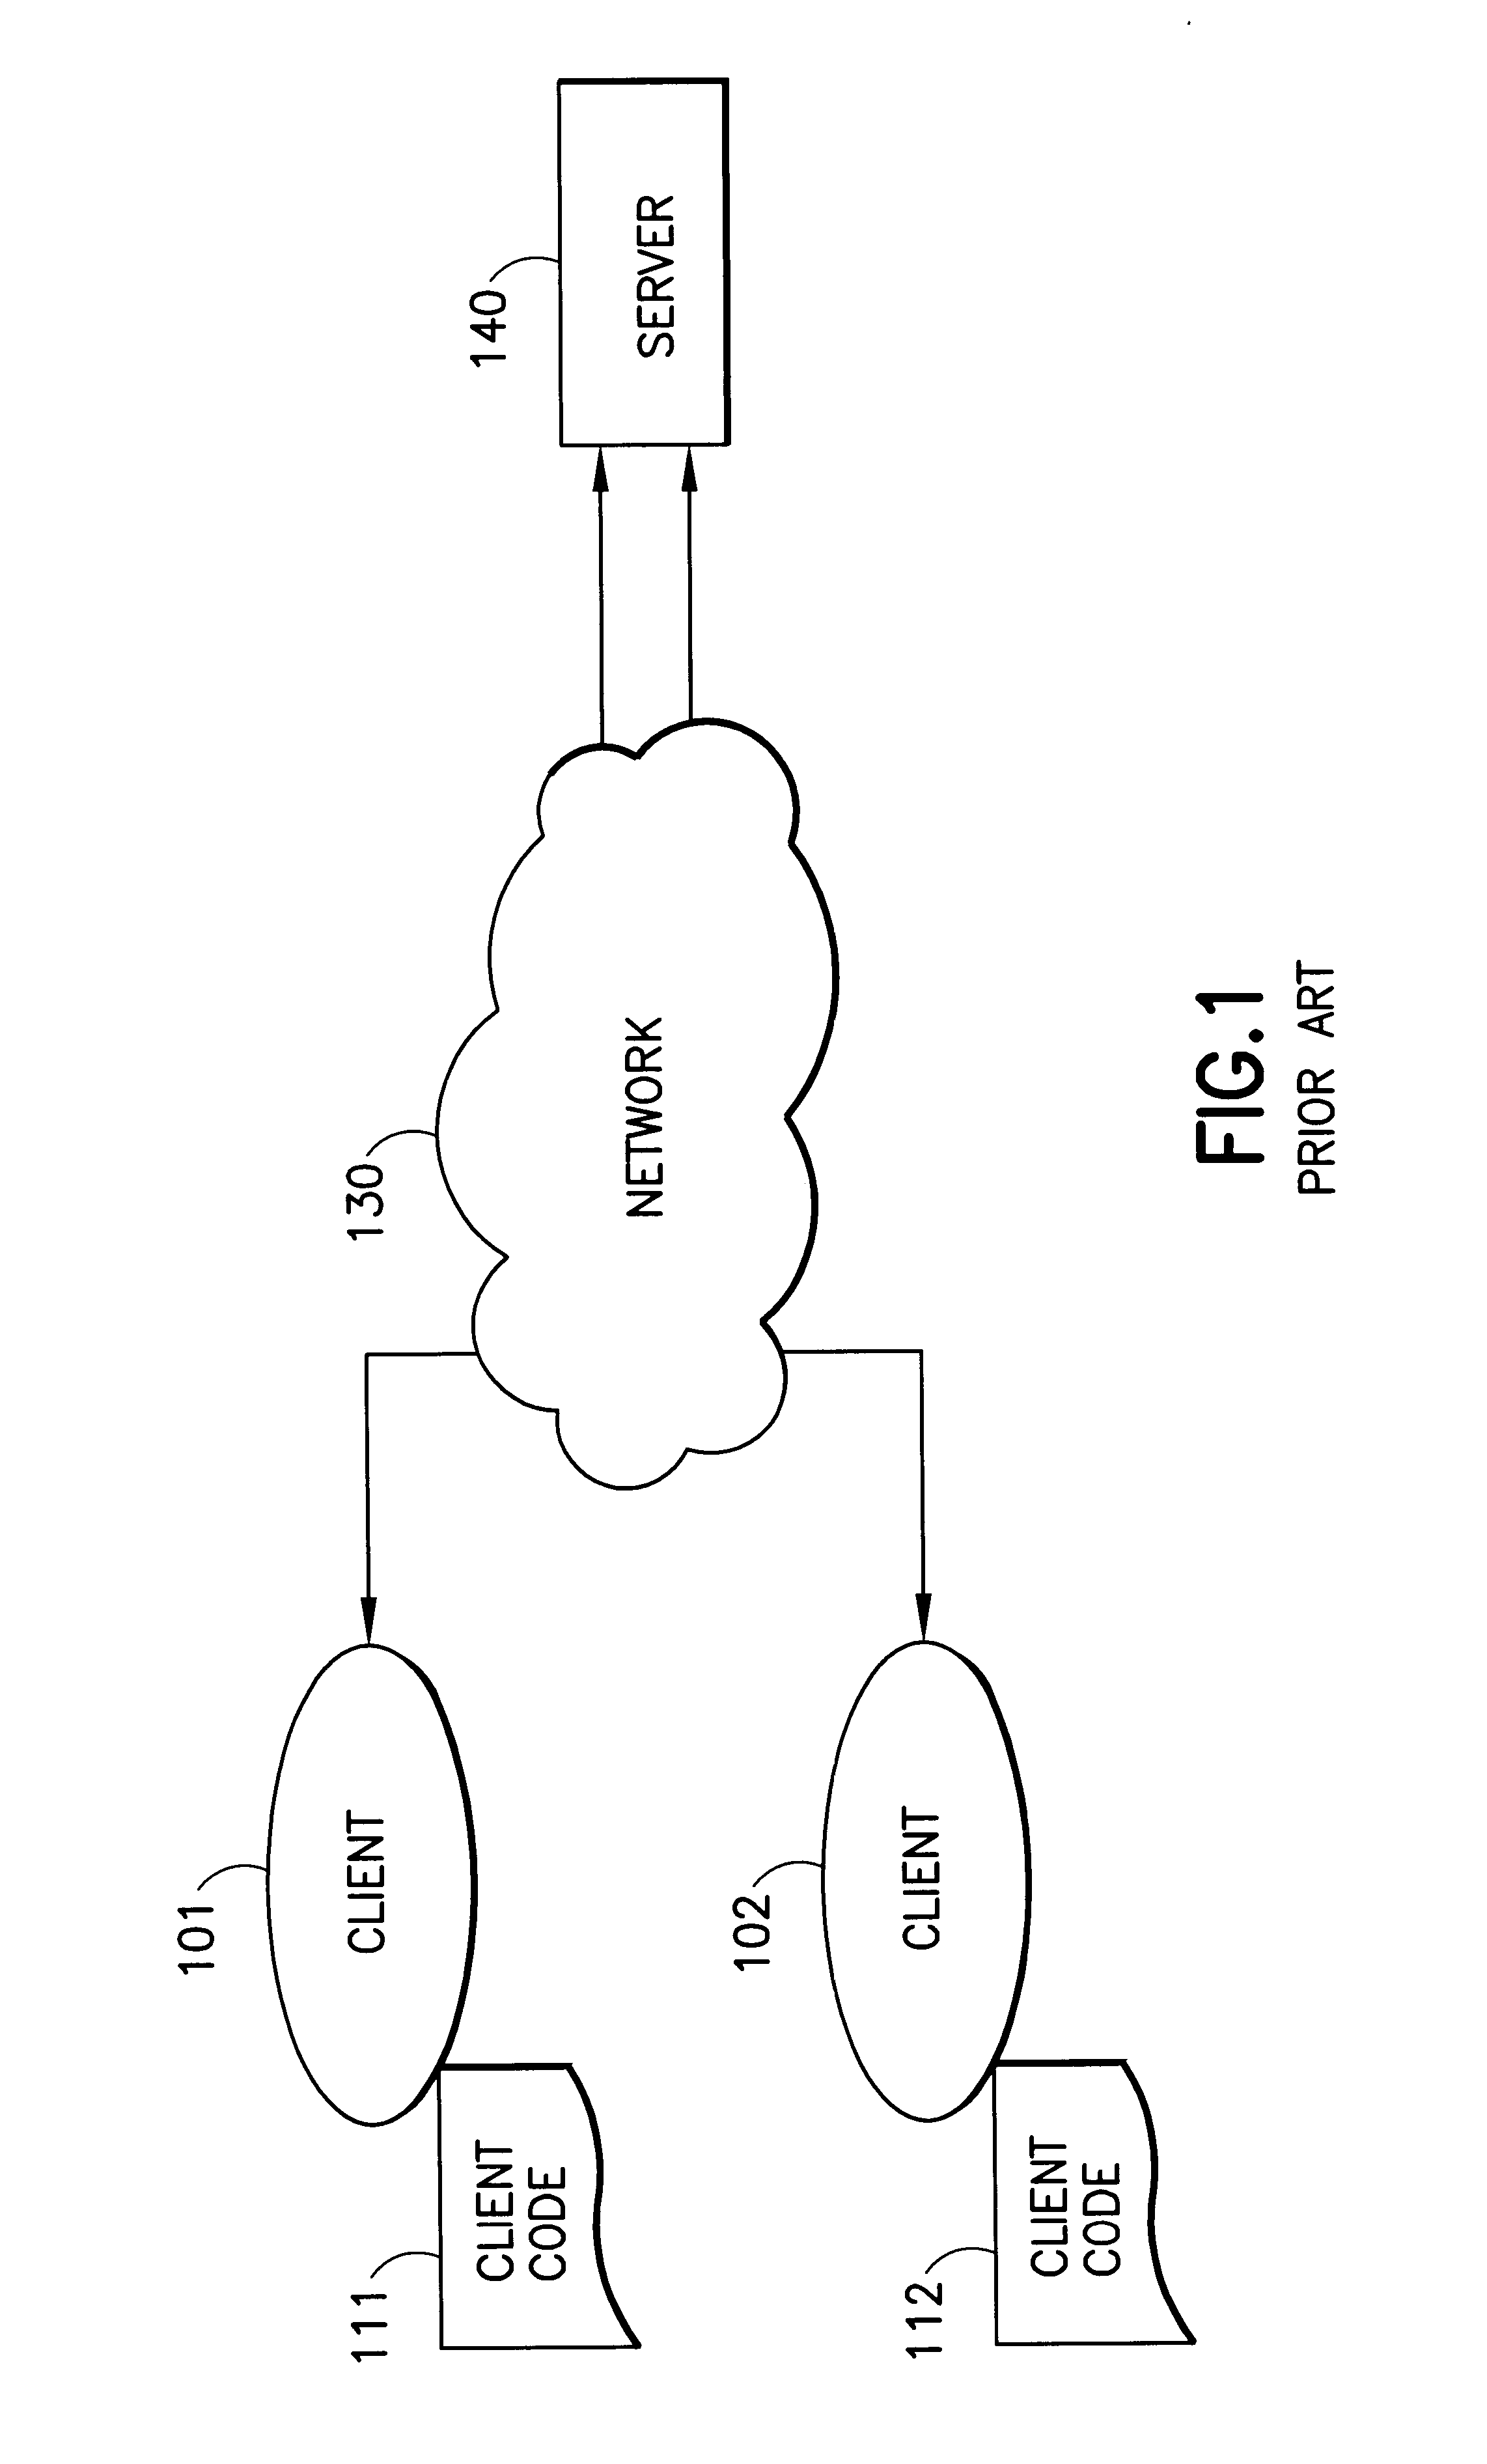 System and method for conducting disconnected transactions with service contracts for pervasive computing devices